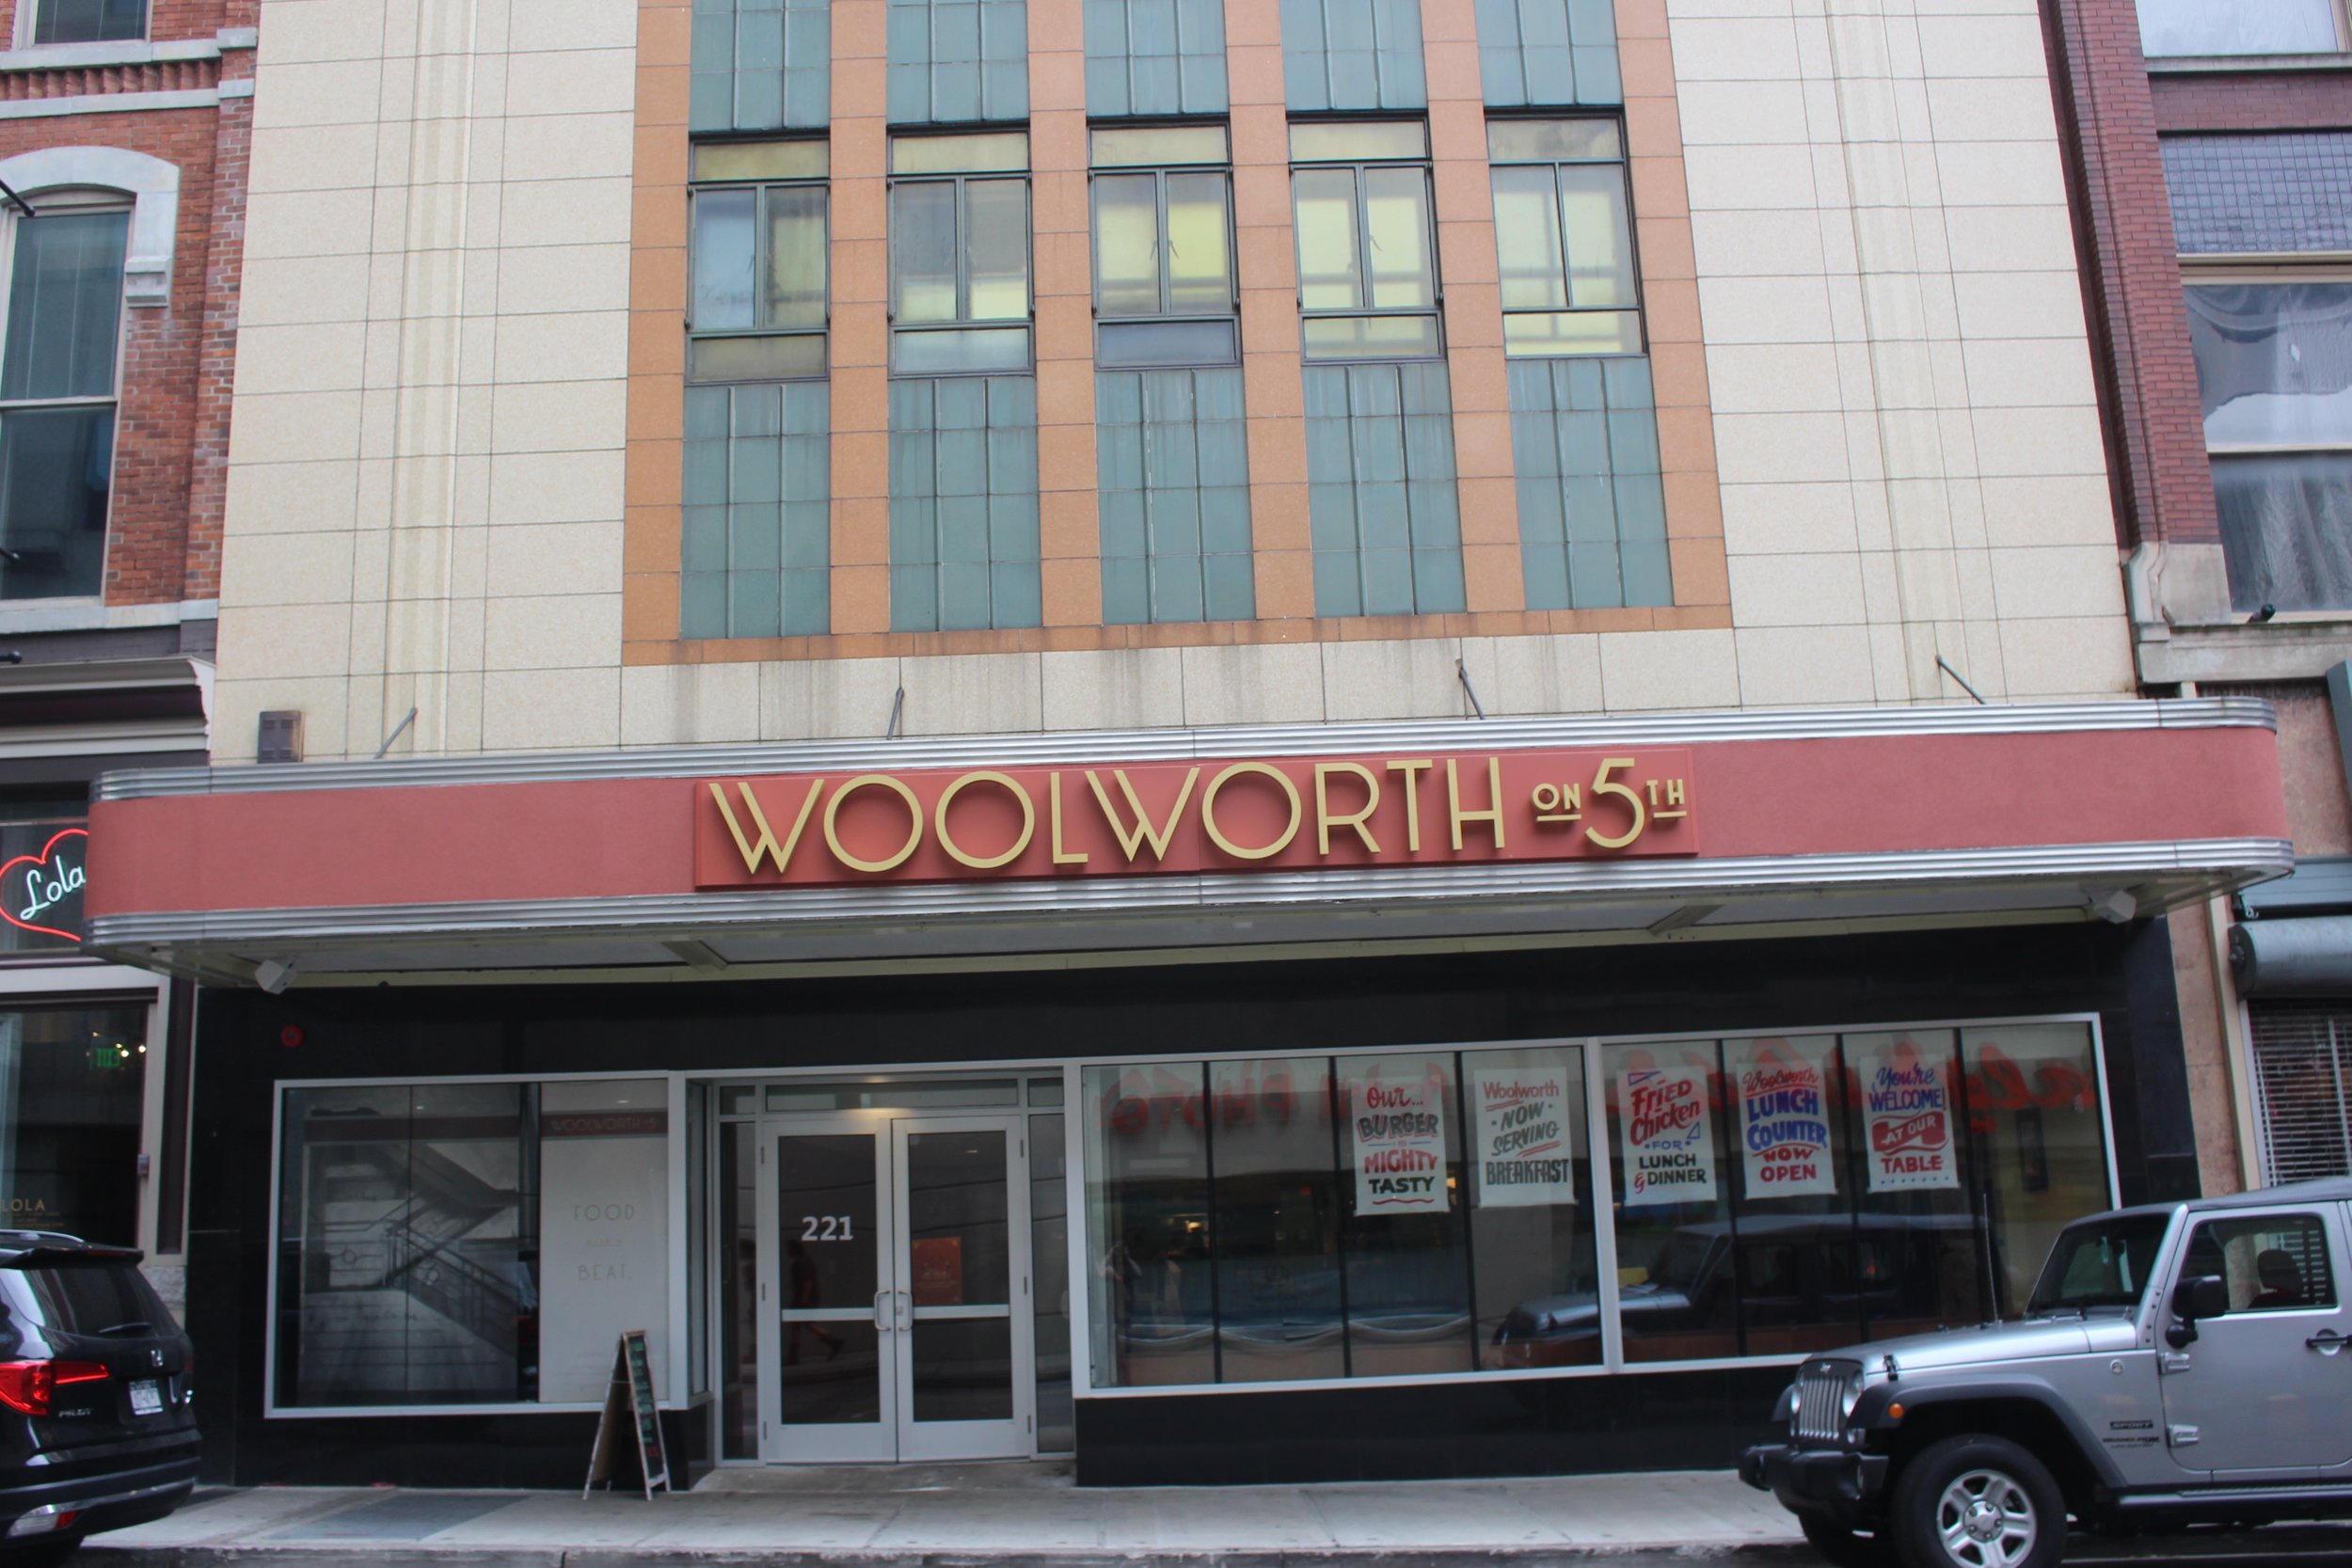 Woolworth on 5th